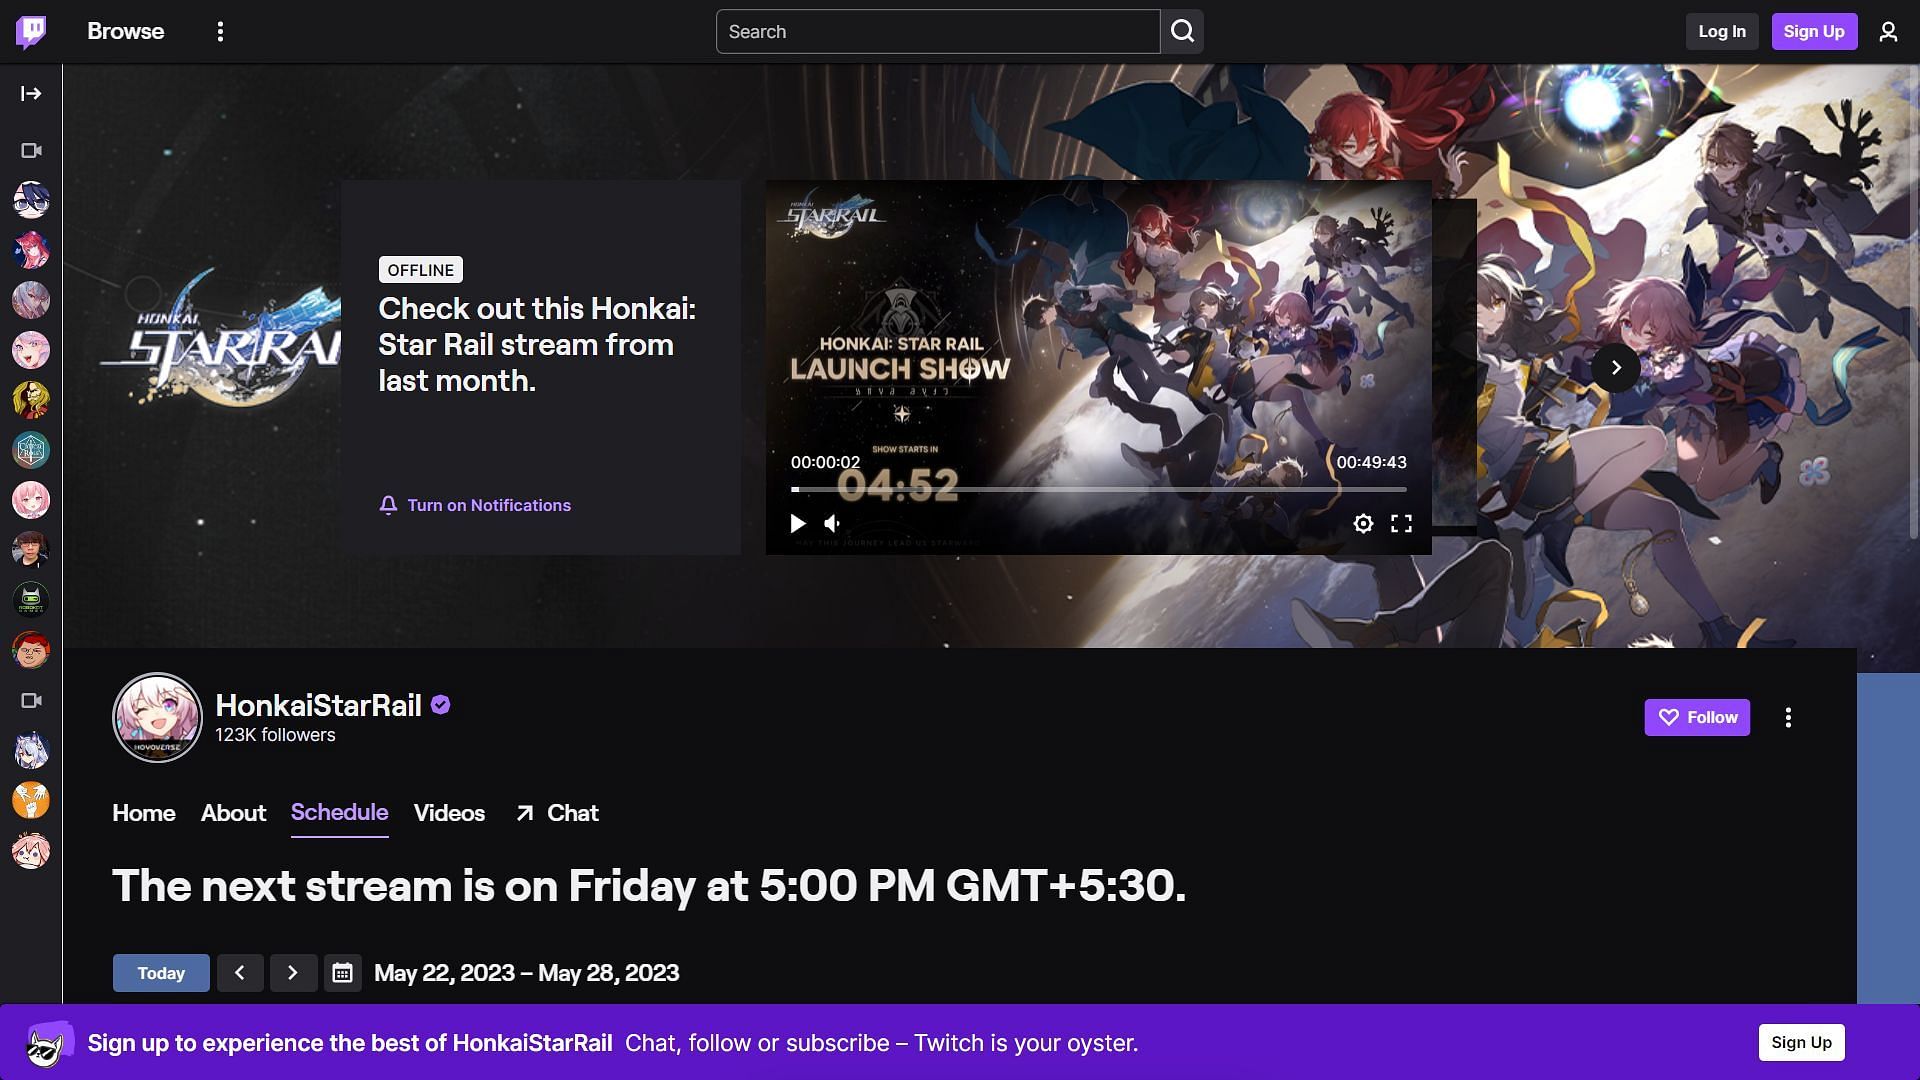 Official Twitch channel (Image via HoYoverse)